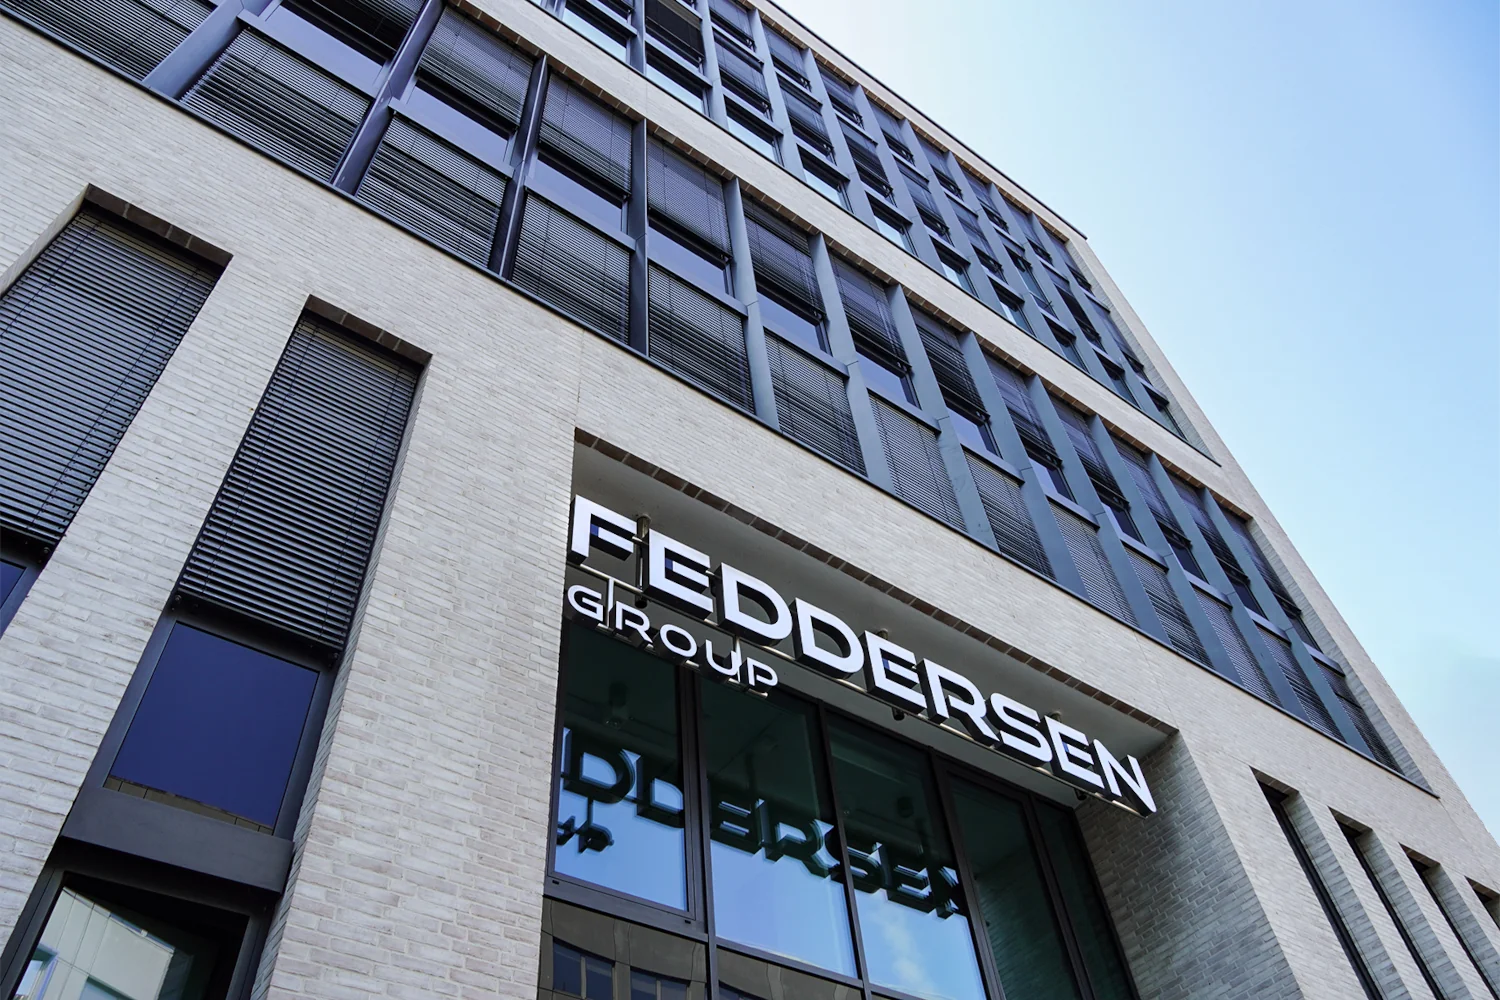 The new company headquarters in Hamburg will be opened at the end of July 2024 (© K.D. Feddersen Holding GmbH)